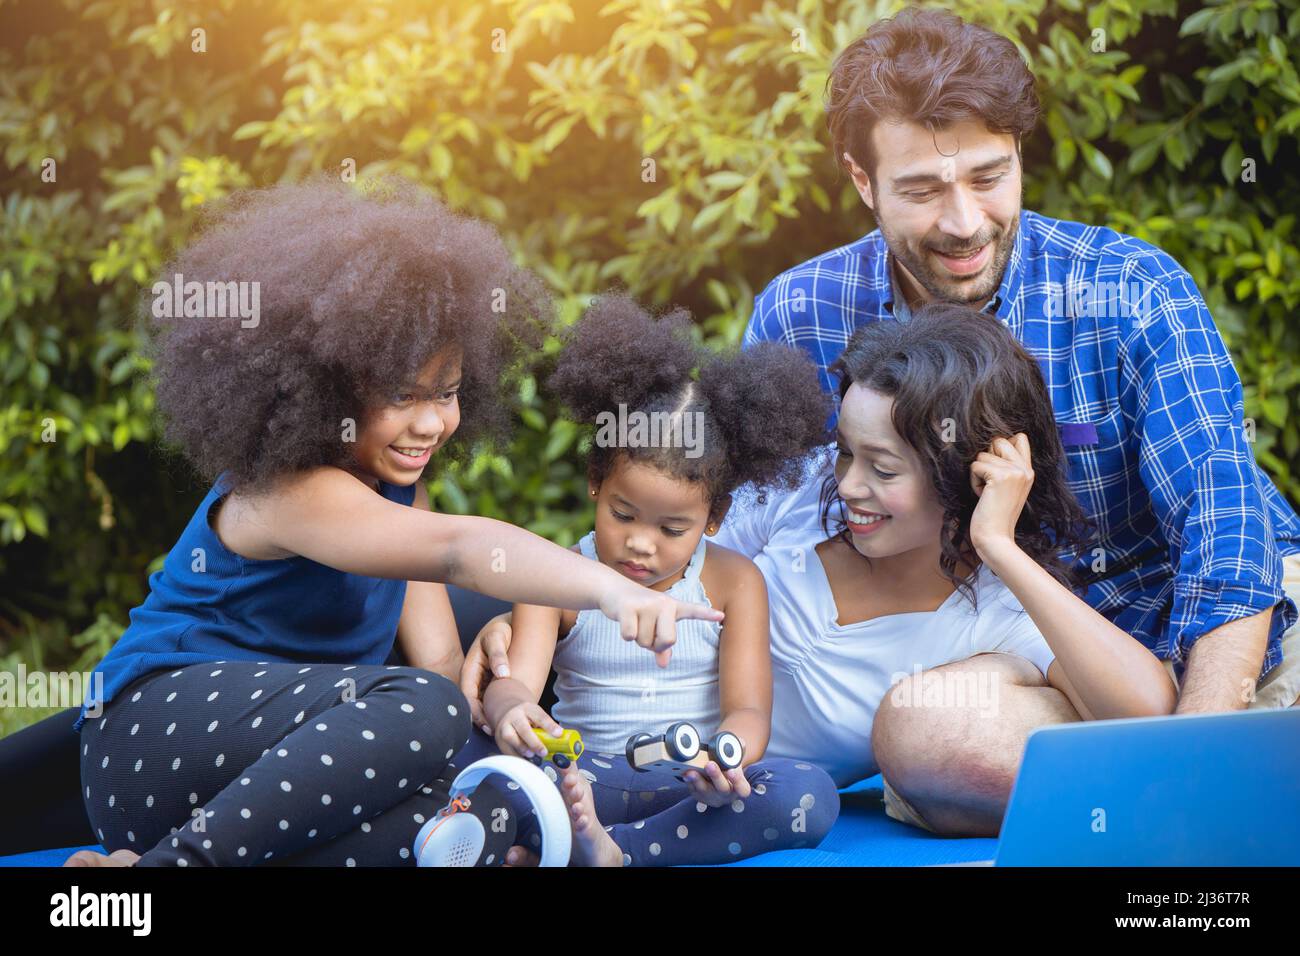 Family happy playing enjoy picnic together in the park garden home backyard. Stock Photo